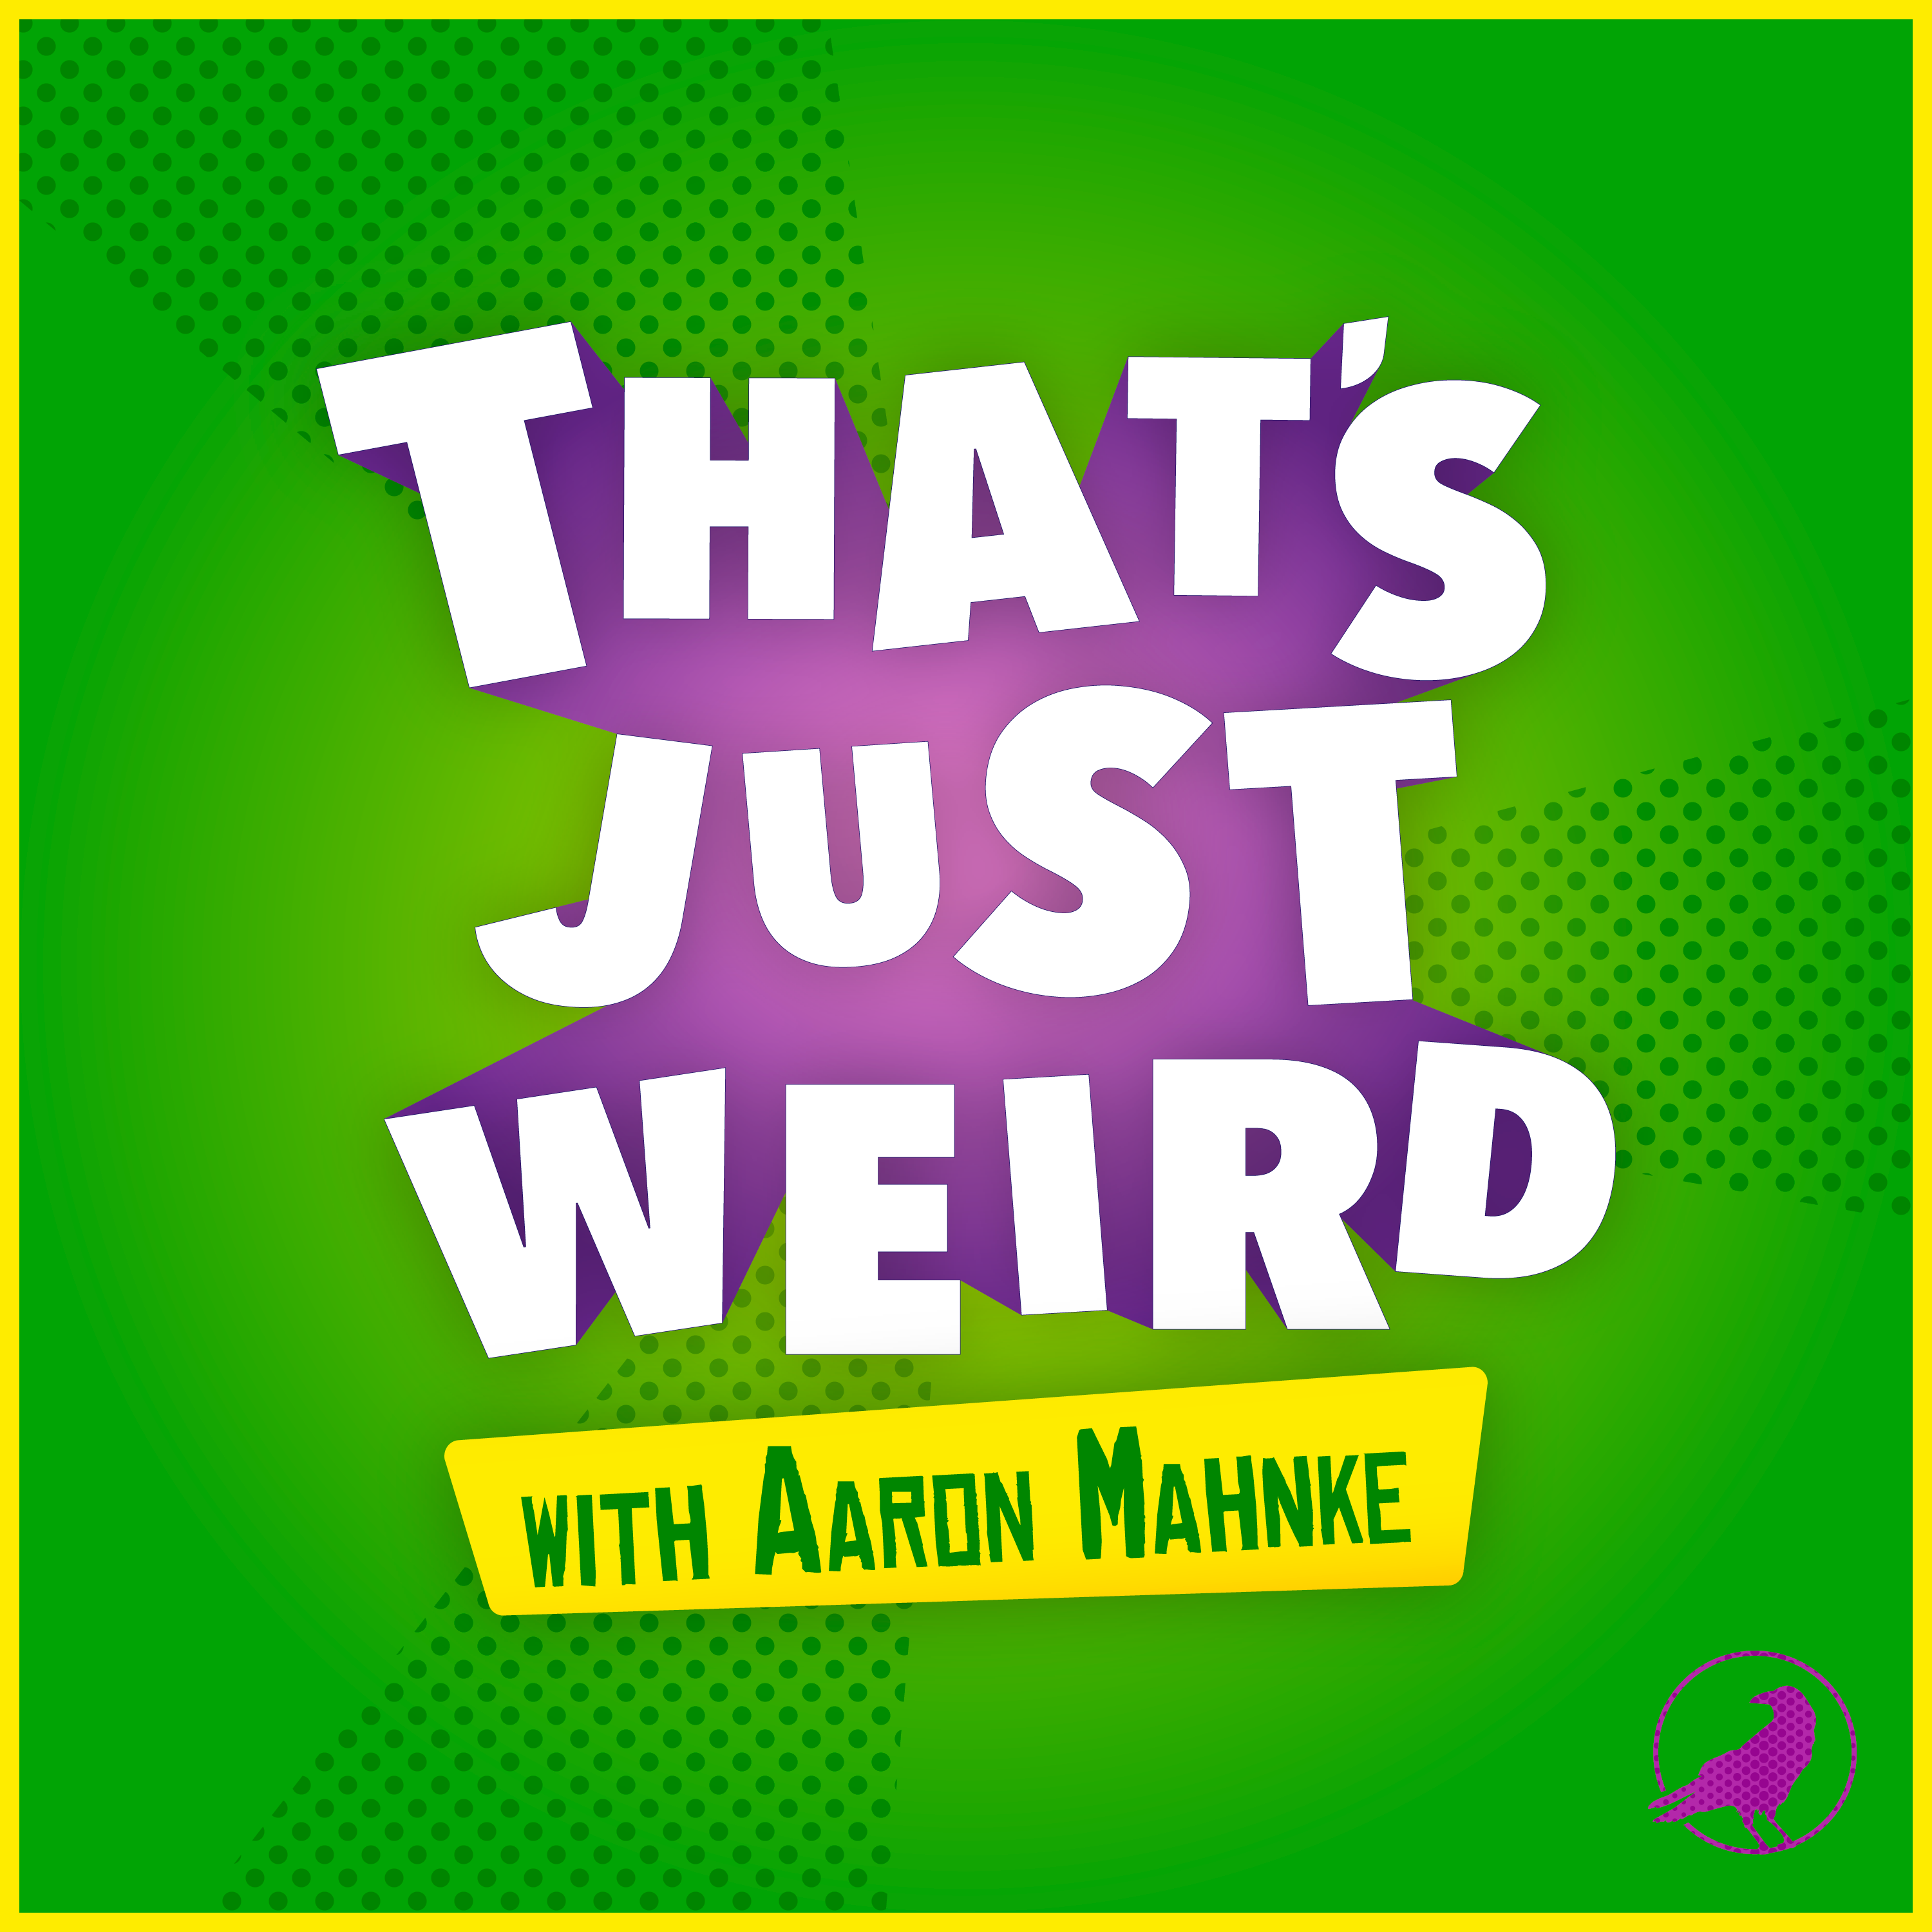 TRAILER: That’s Just Weird with Aaron Mahnke